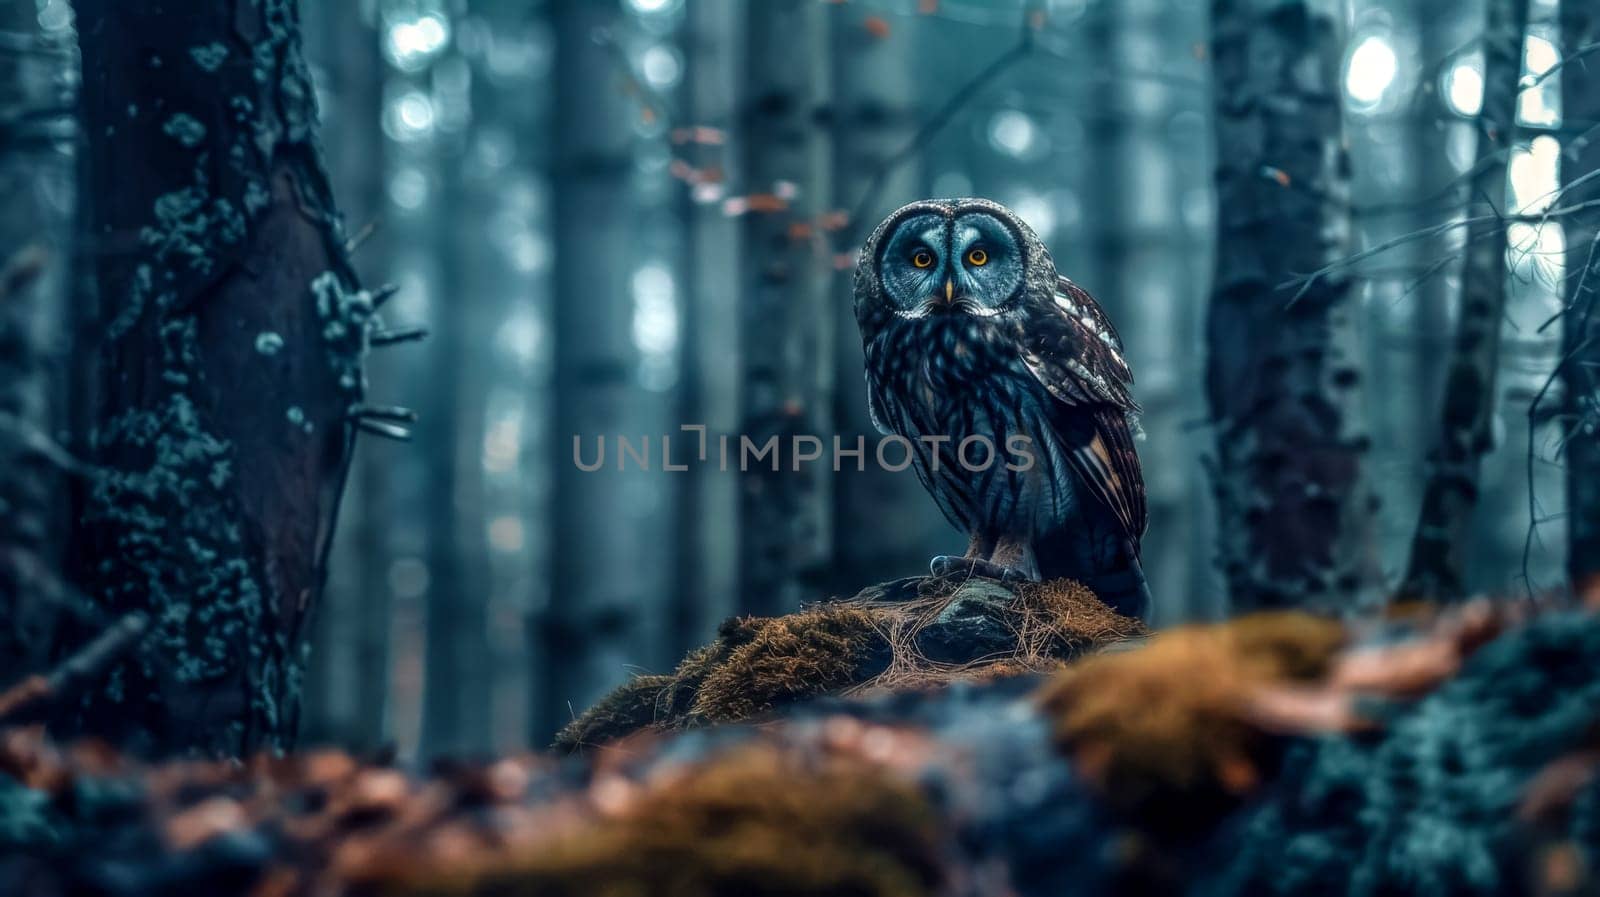 Captivating owl stands alert in a misty, enchanted forest bathed in twilight blue hues